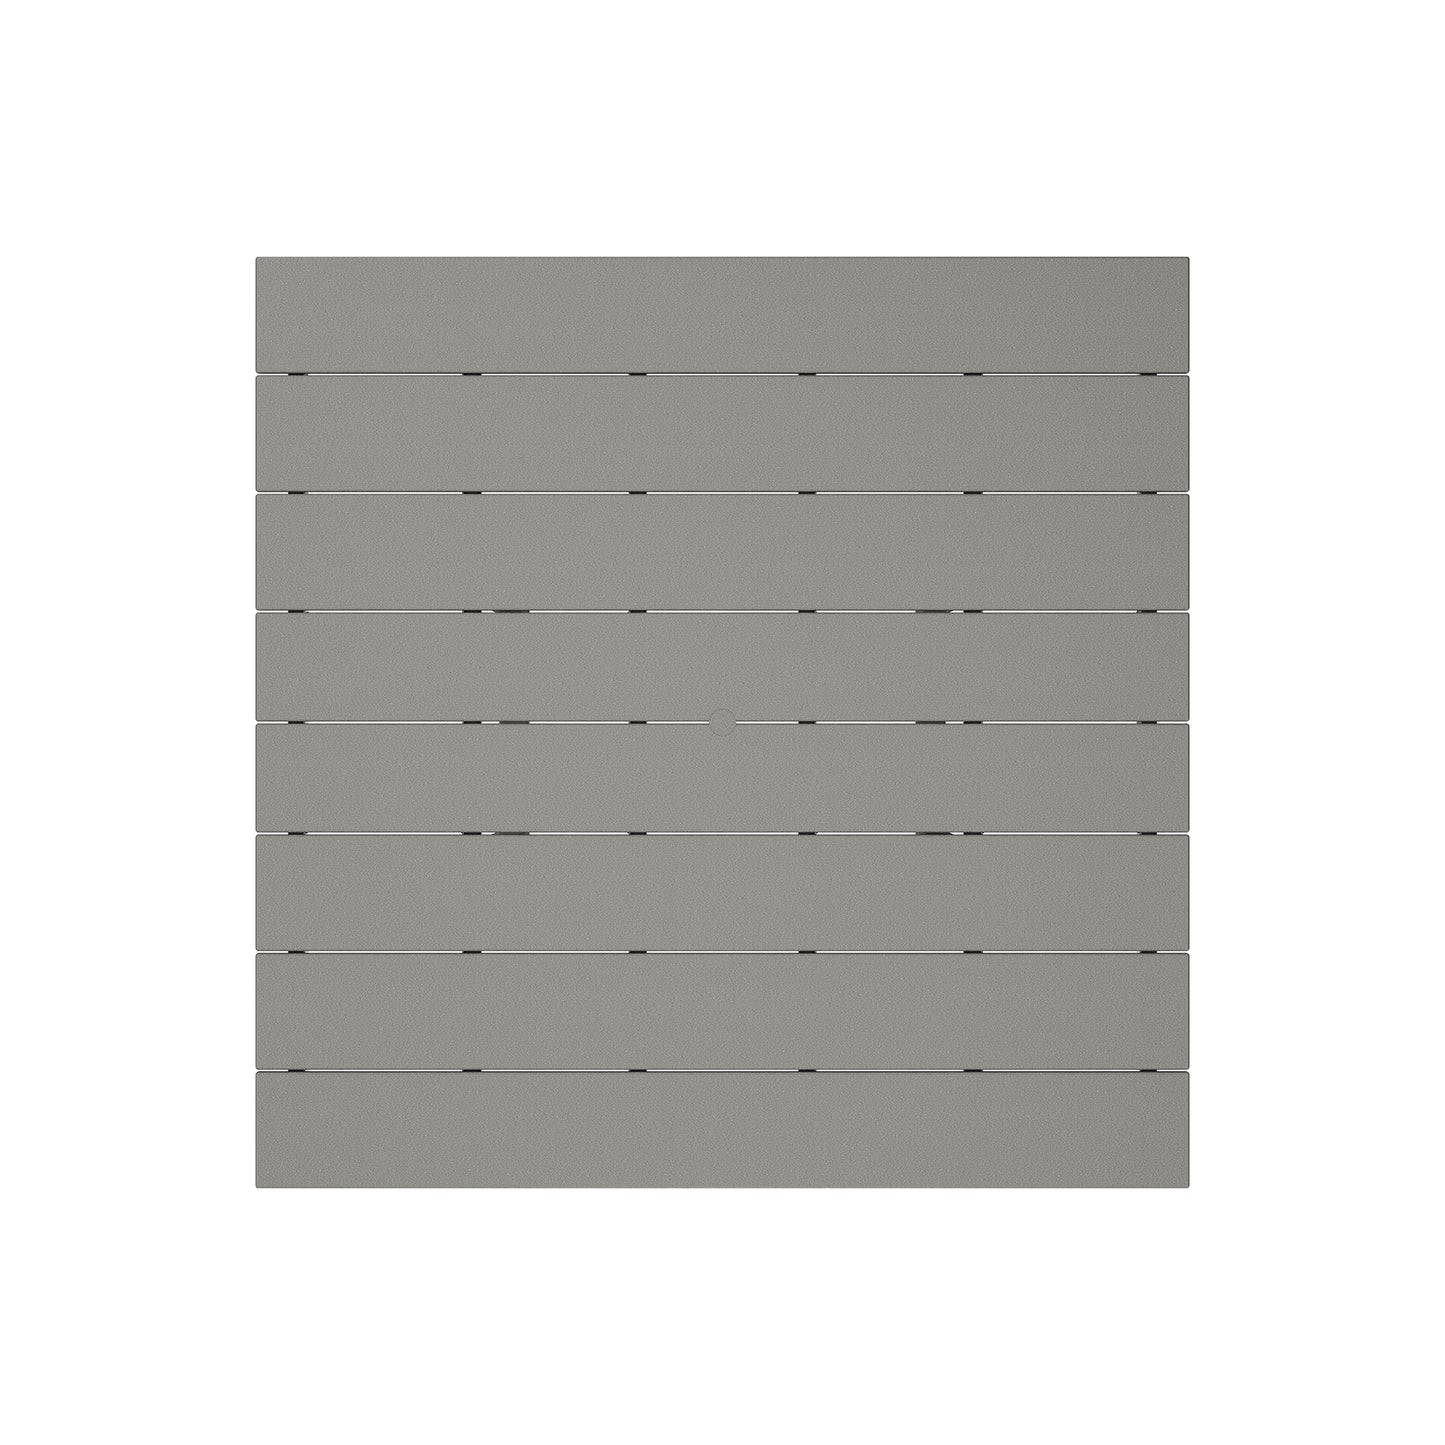 A grid made up of multiple horizontal gray bars connected by small dots, creating an organized pattern on a POLYWOOD® Farmhouse Trestle 59" Dining Table background.